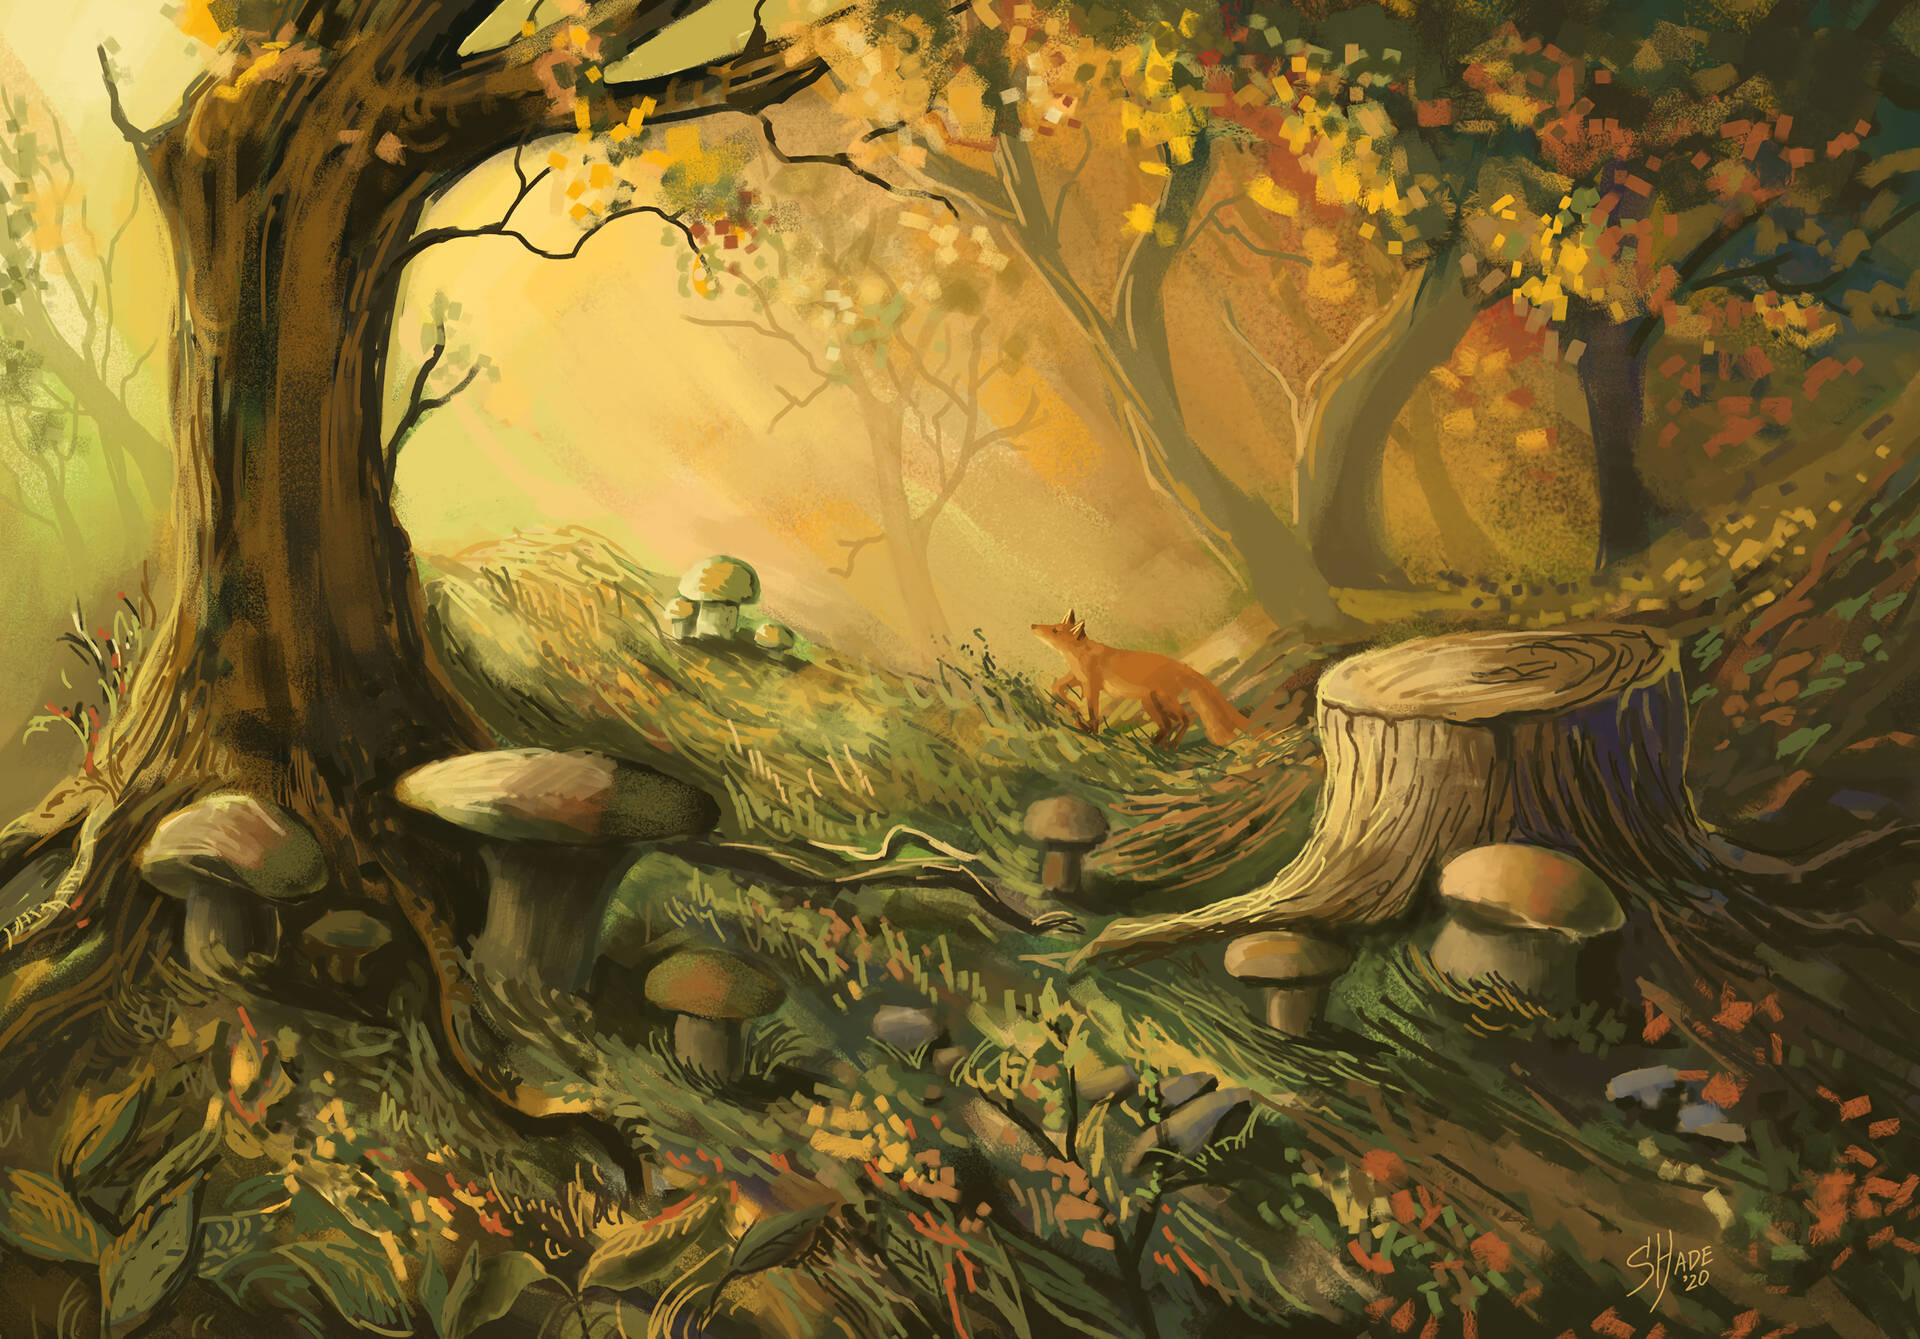 Enjoy The Magic Of Nature In A Mushroom Forest